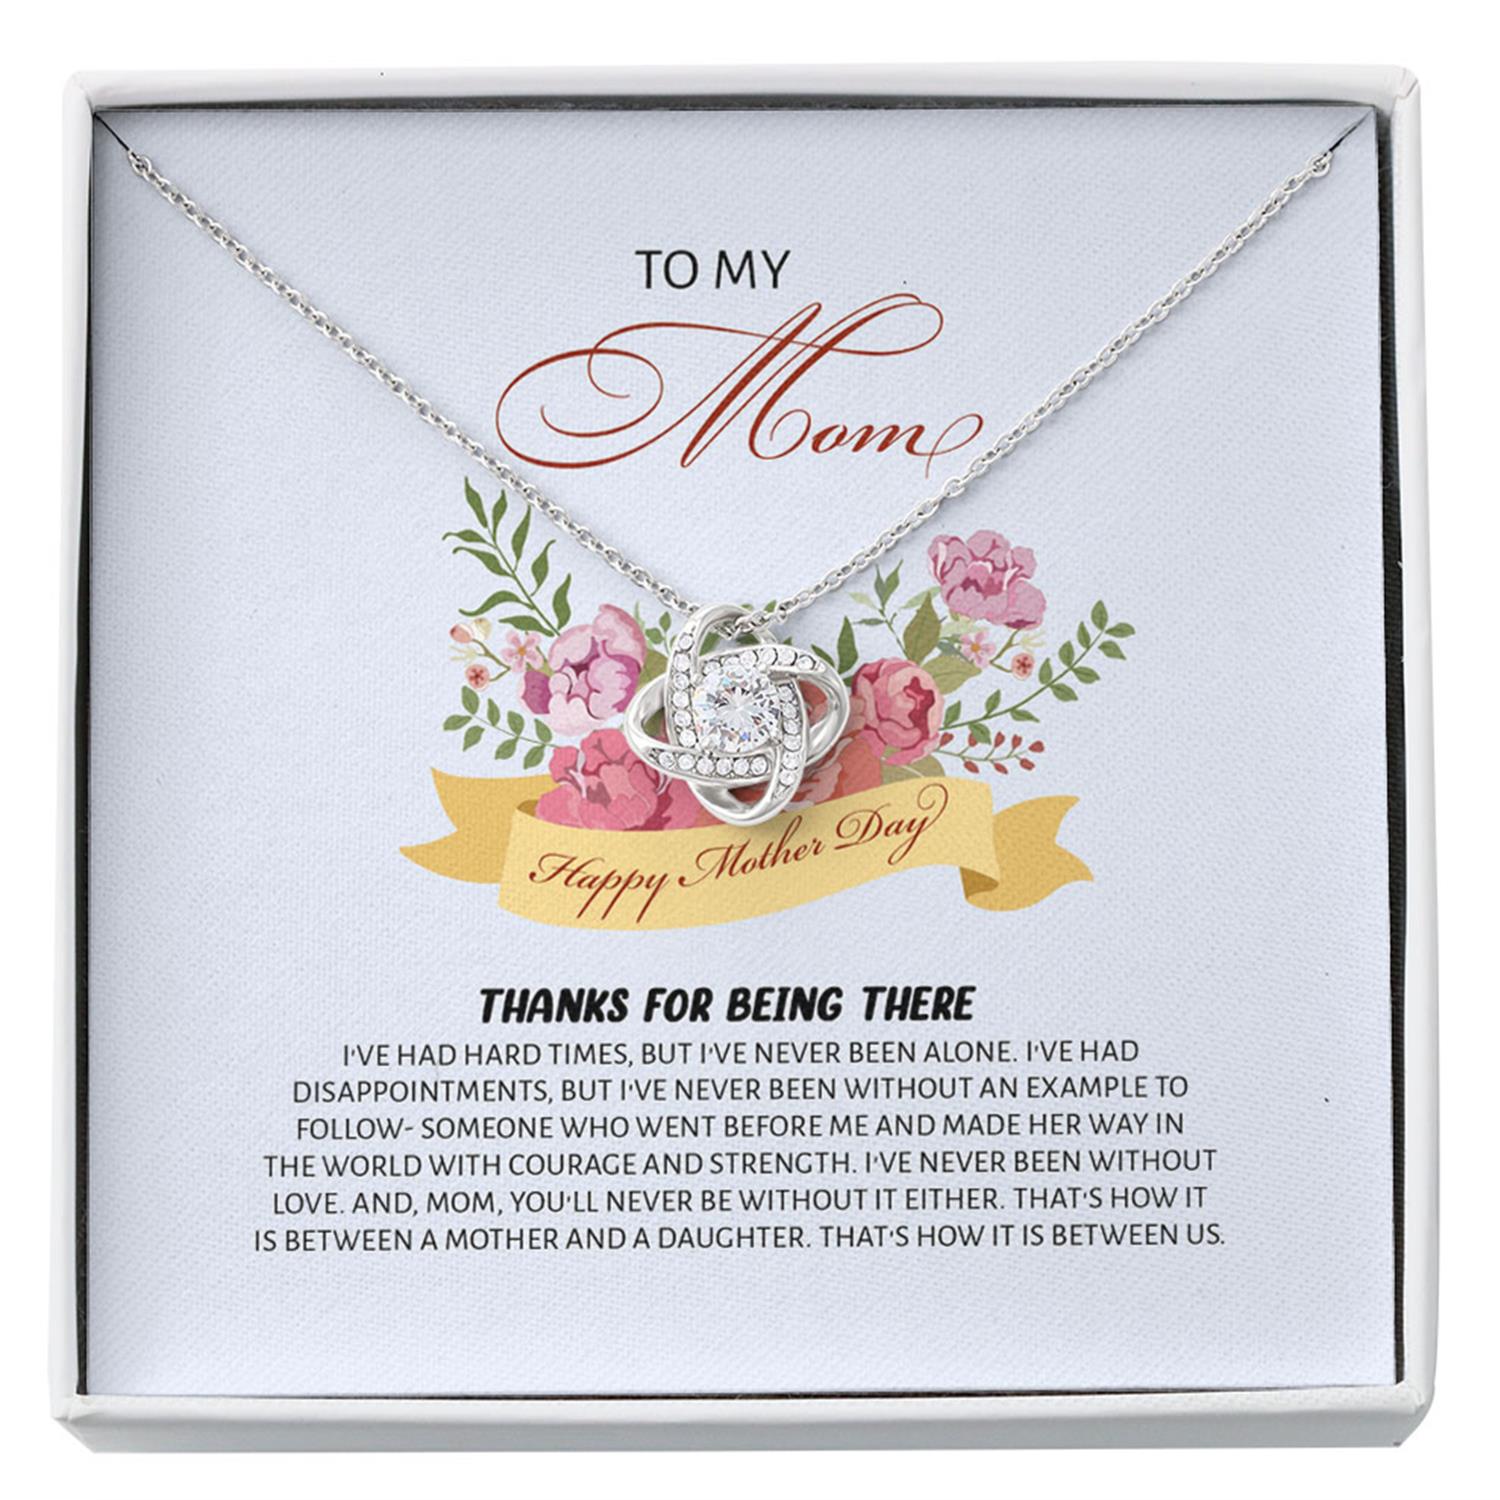 Mom Necklace, Mother Daughter Necklace, Presents For Mom Gifts, Thanks Being There Custom Necklace